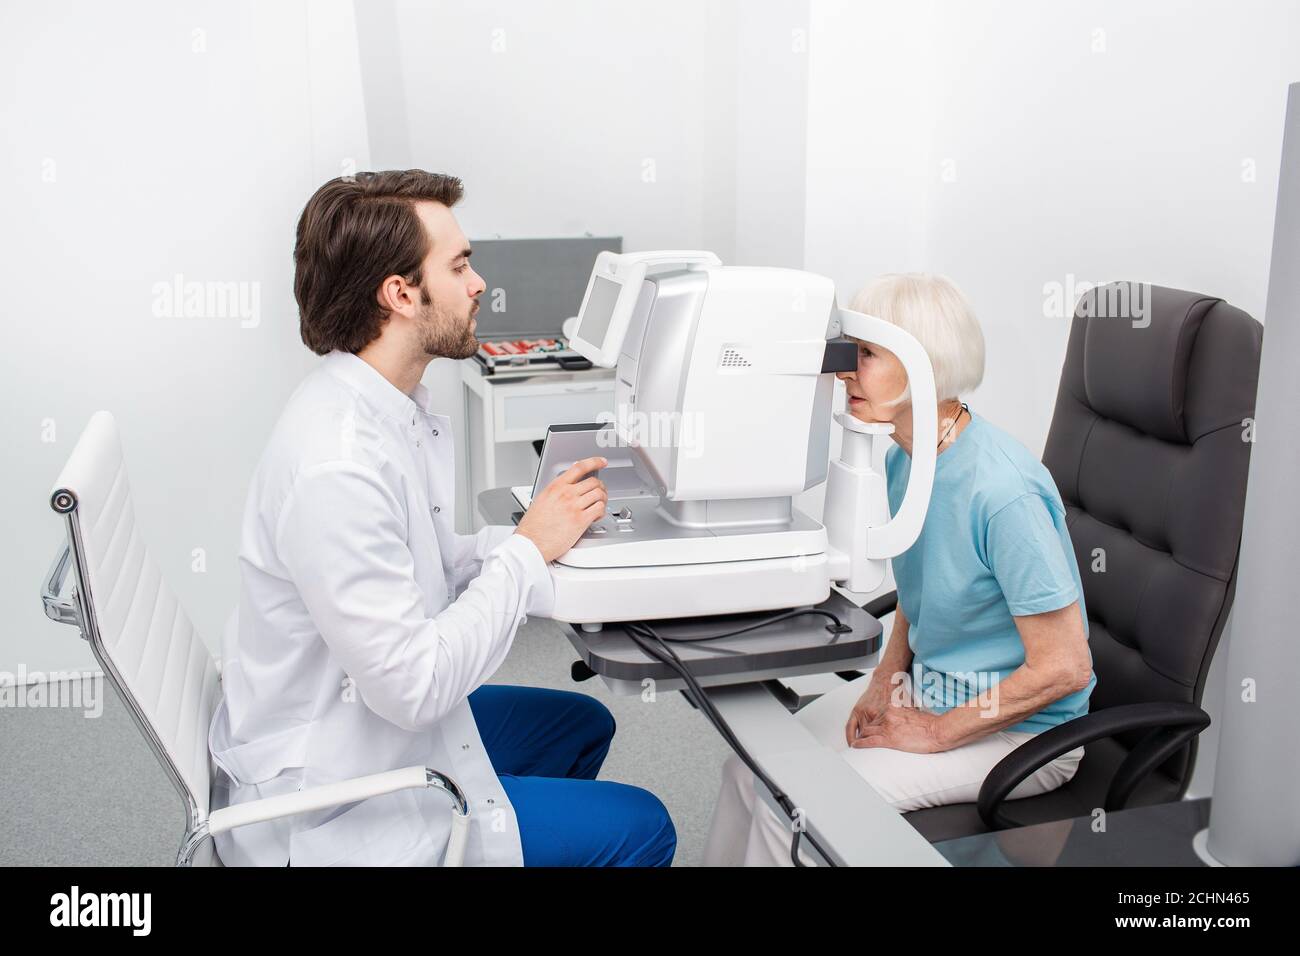 Concentrated optometrist checking eye for a patient using modern equipment. Eye exam and vision diagnostic Stock Photo